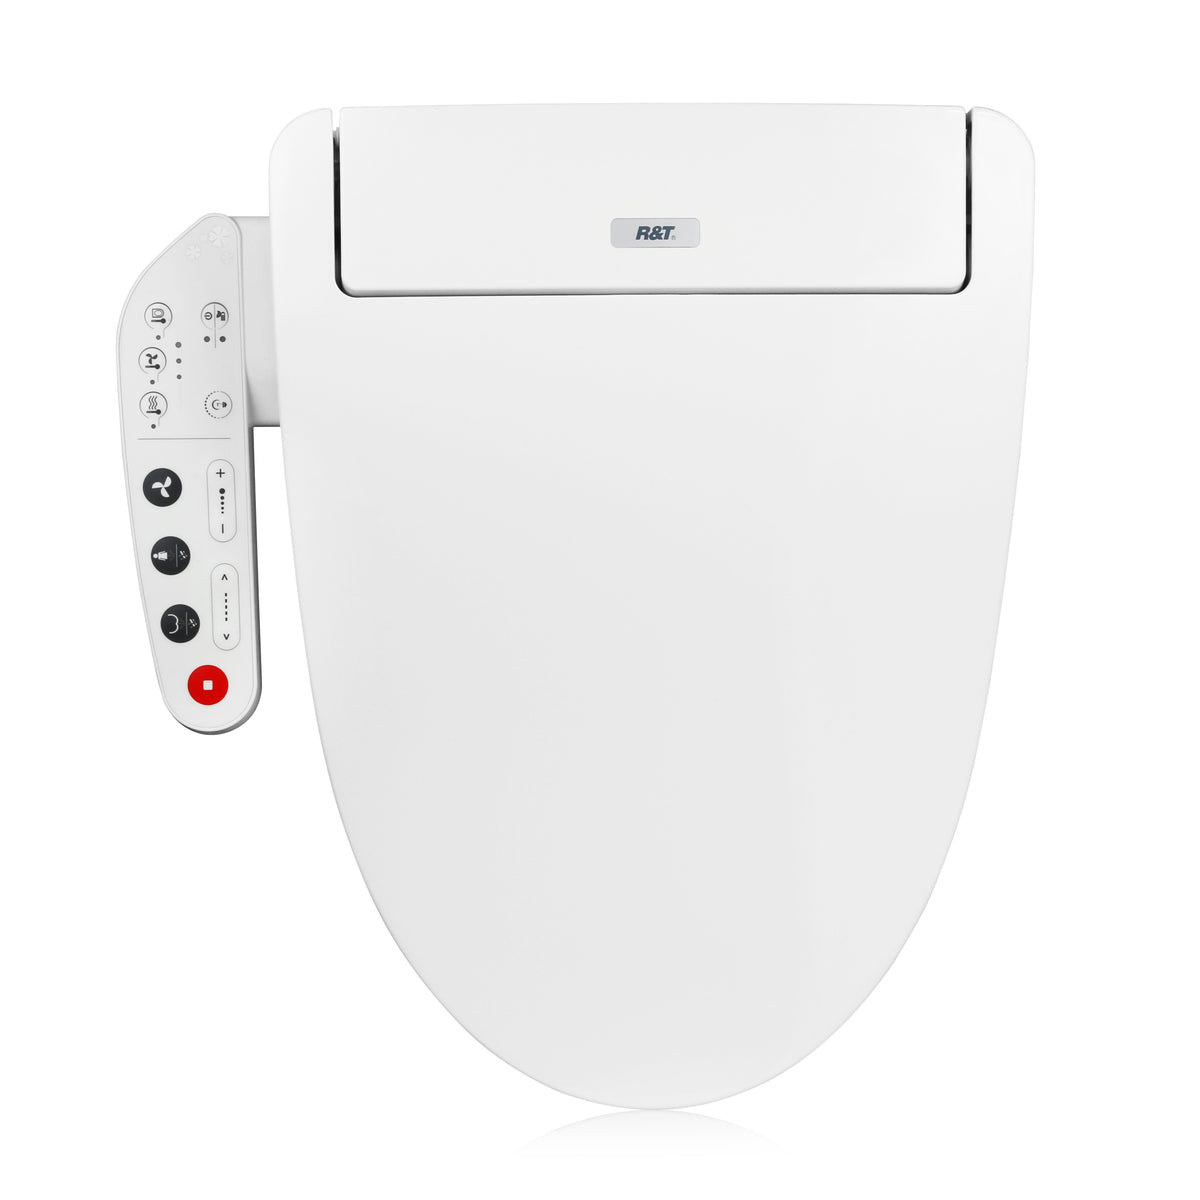 R&T V2601 Electric Bidet Toilet Seat with Side Control Panel